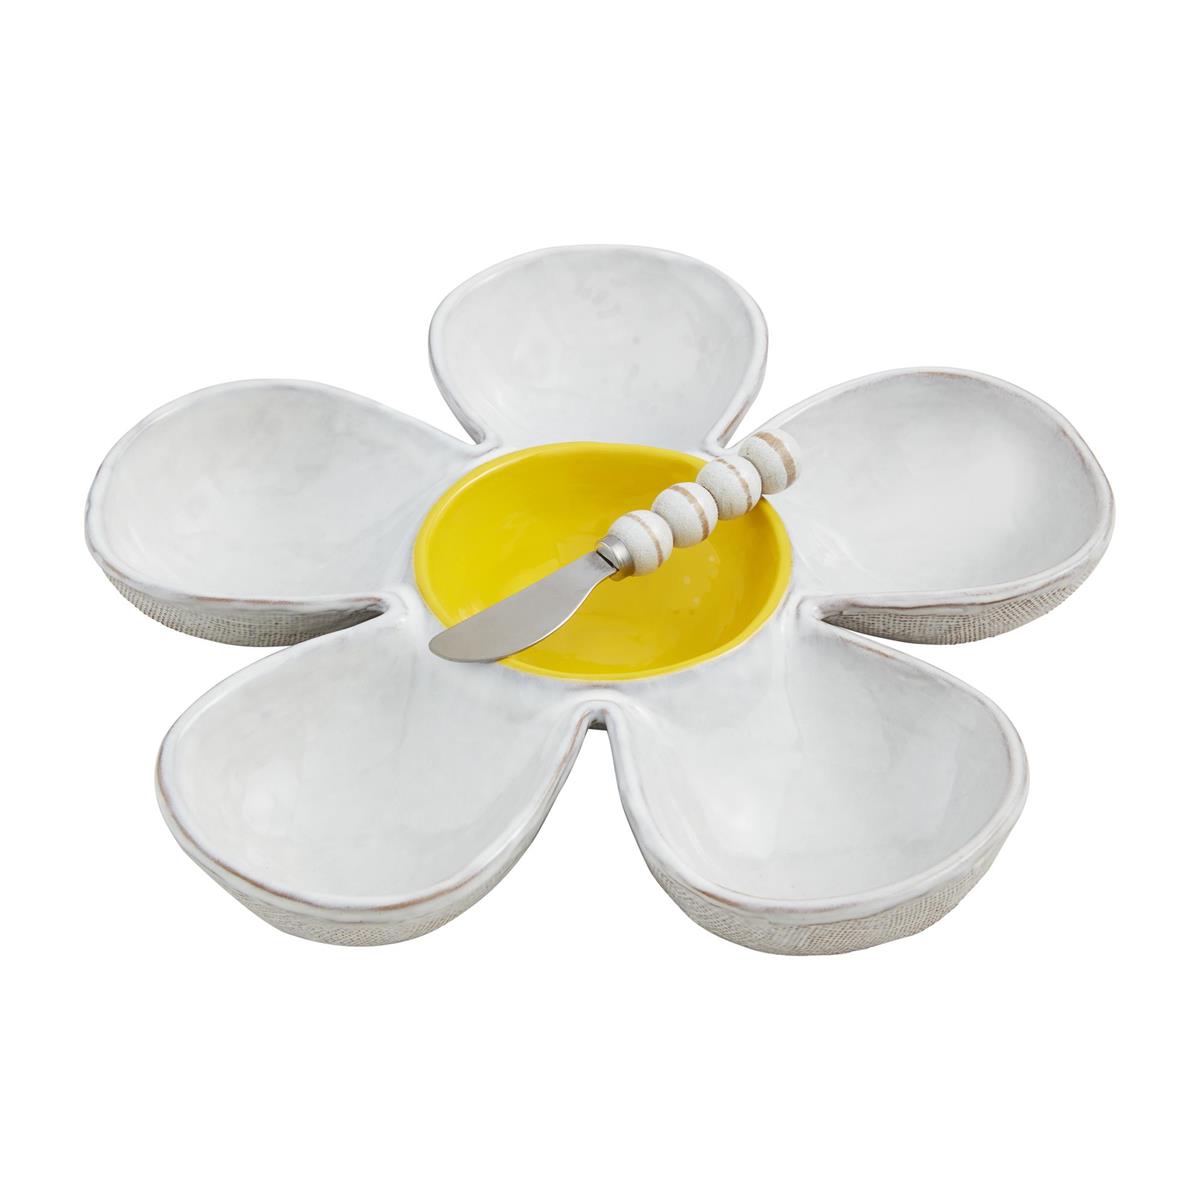 A white Daisy chip platter with a yellow middle for the dip, and knife on top.